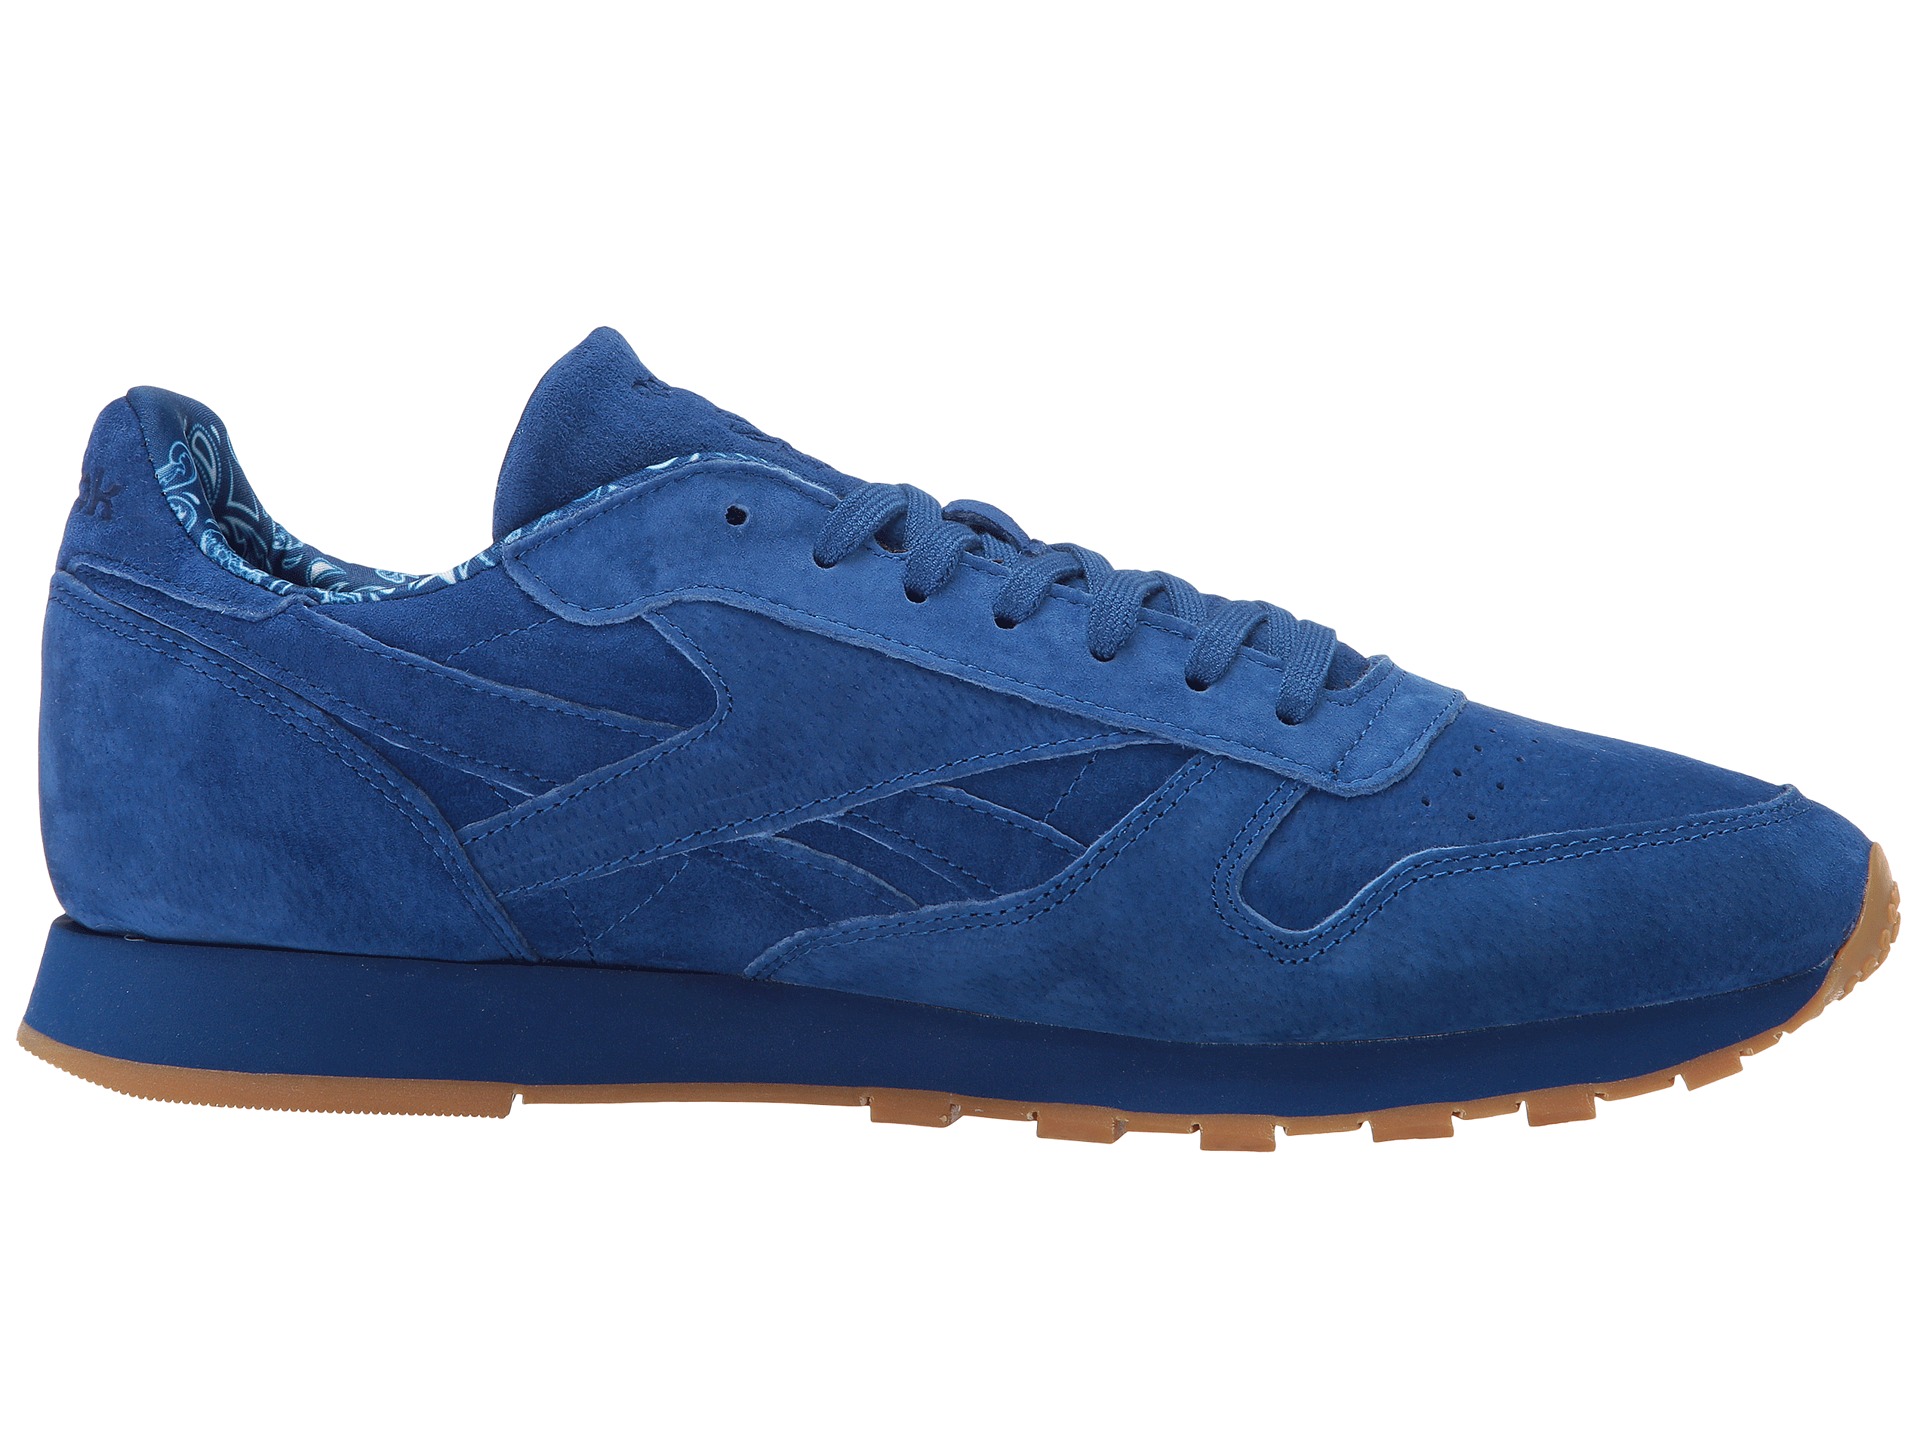 Reebok Lifestyle Classic Leather TDC at Zappos.com